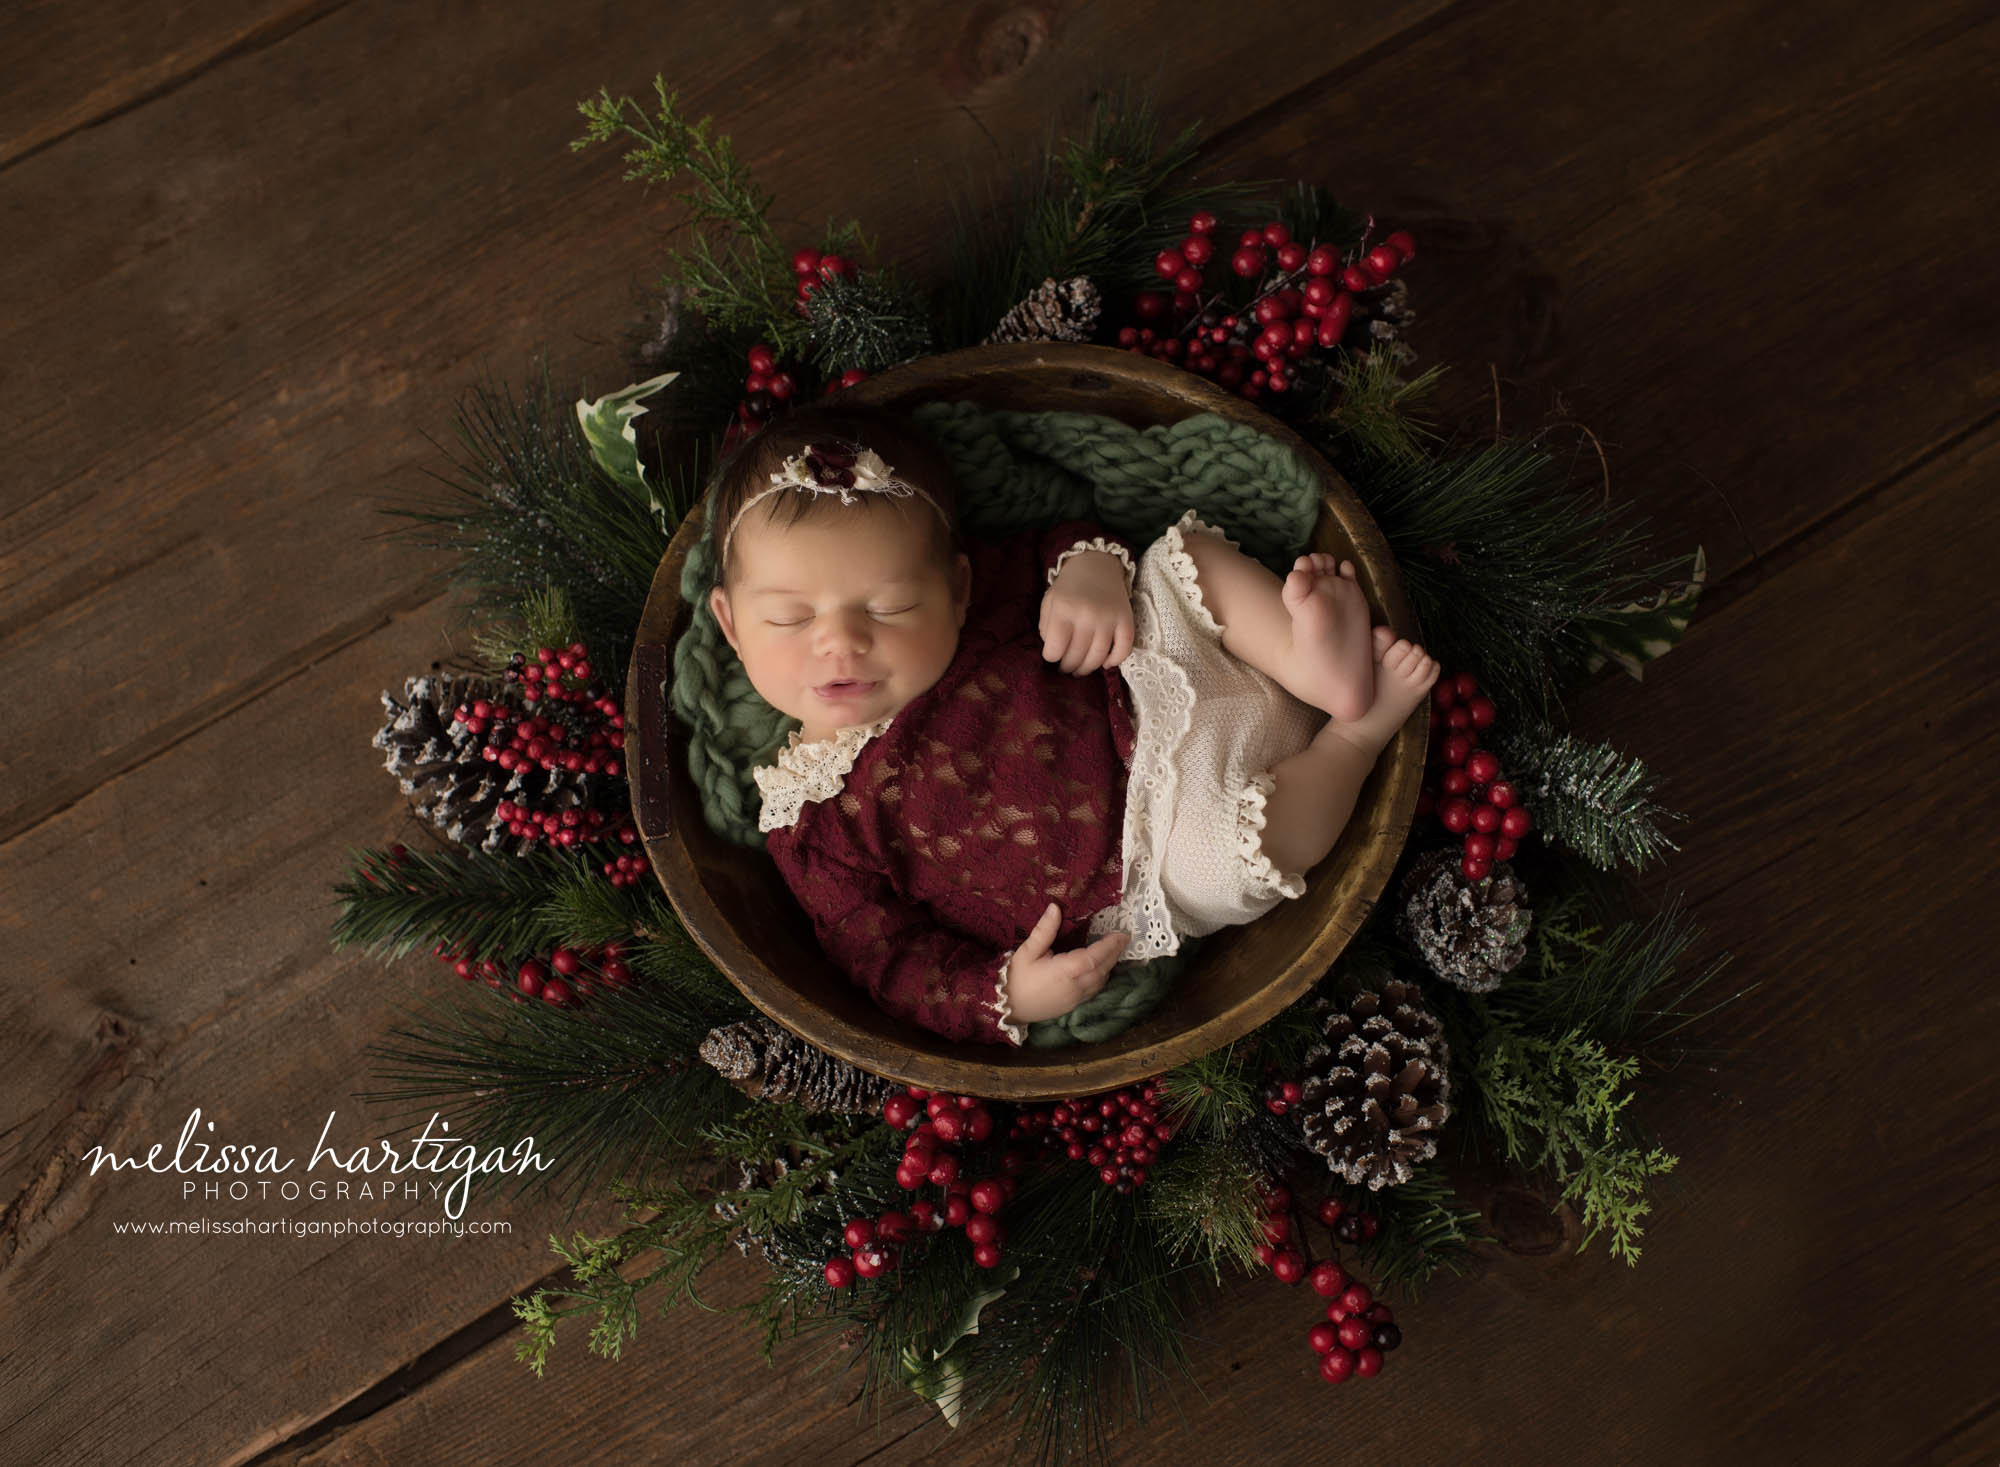 newborn baby girl posed in wooden bowl wearing red baby girl outfit posed with christmas garland and pinecones